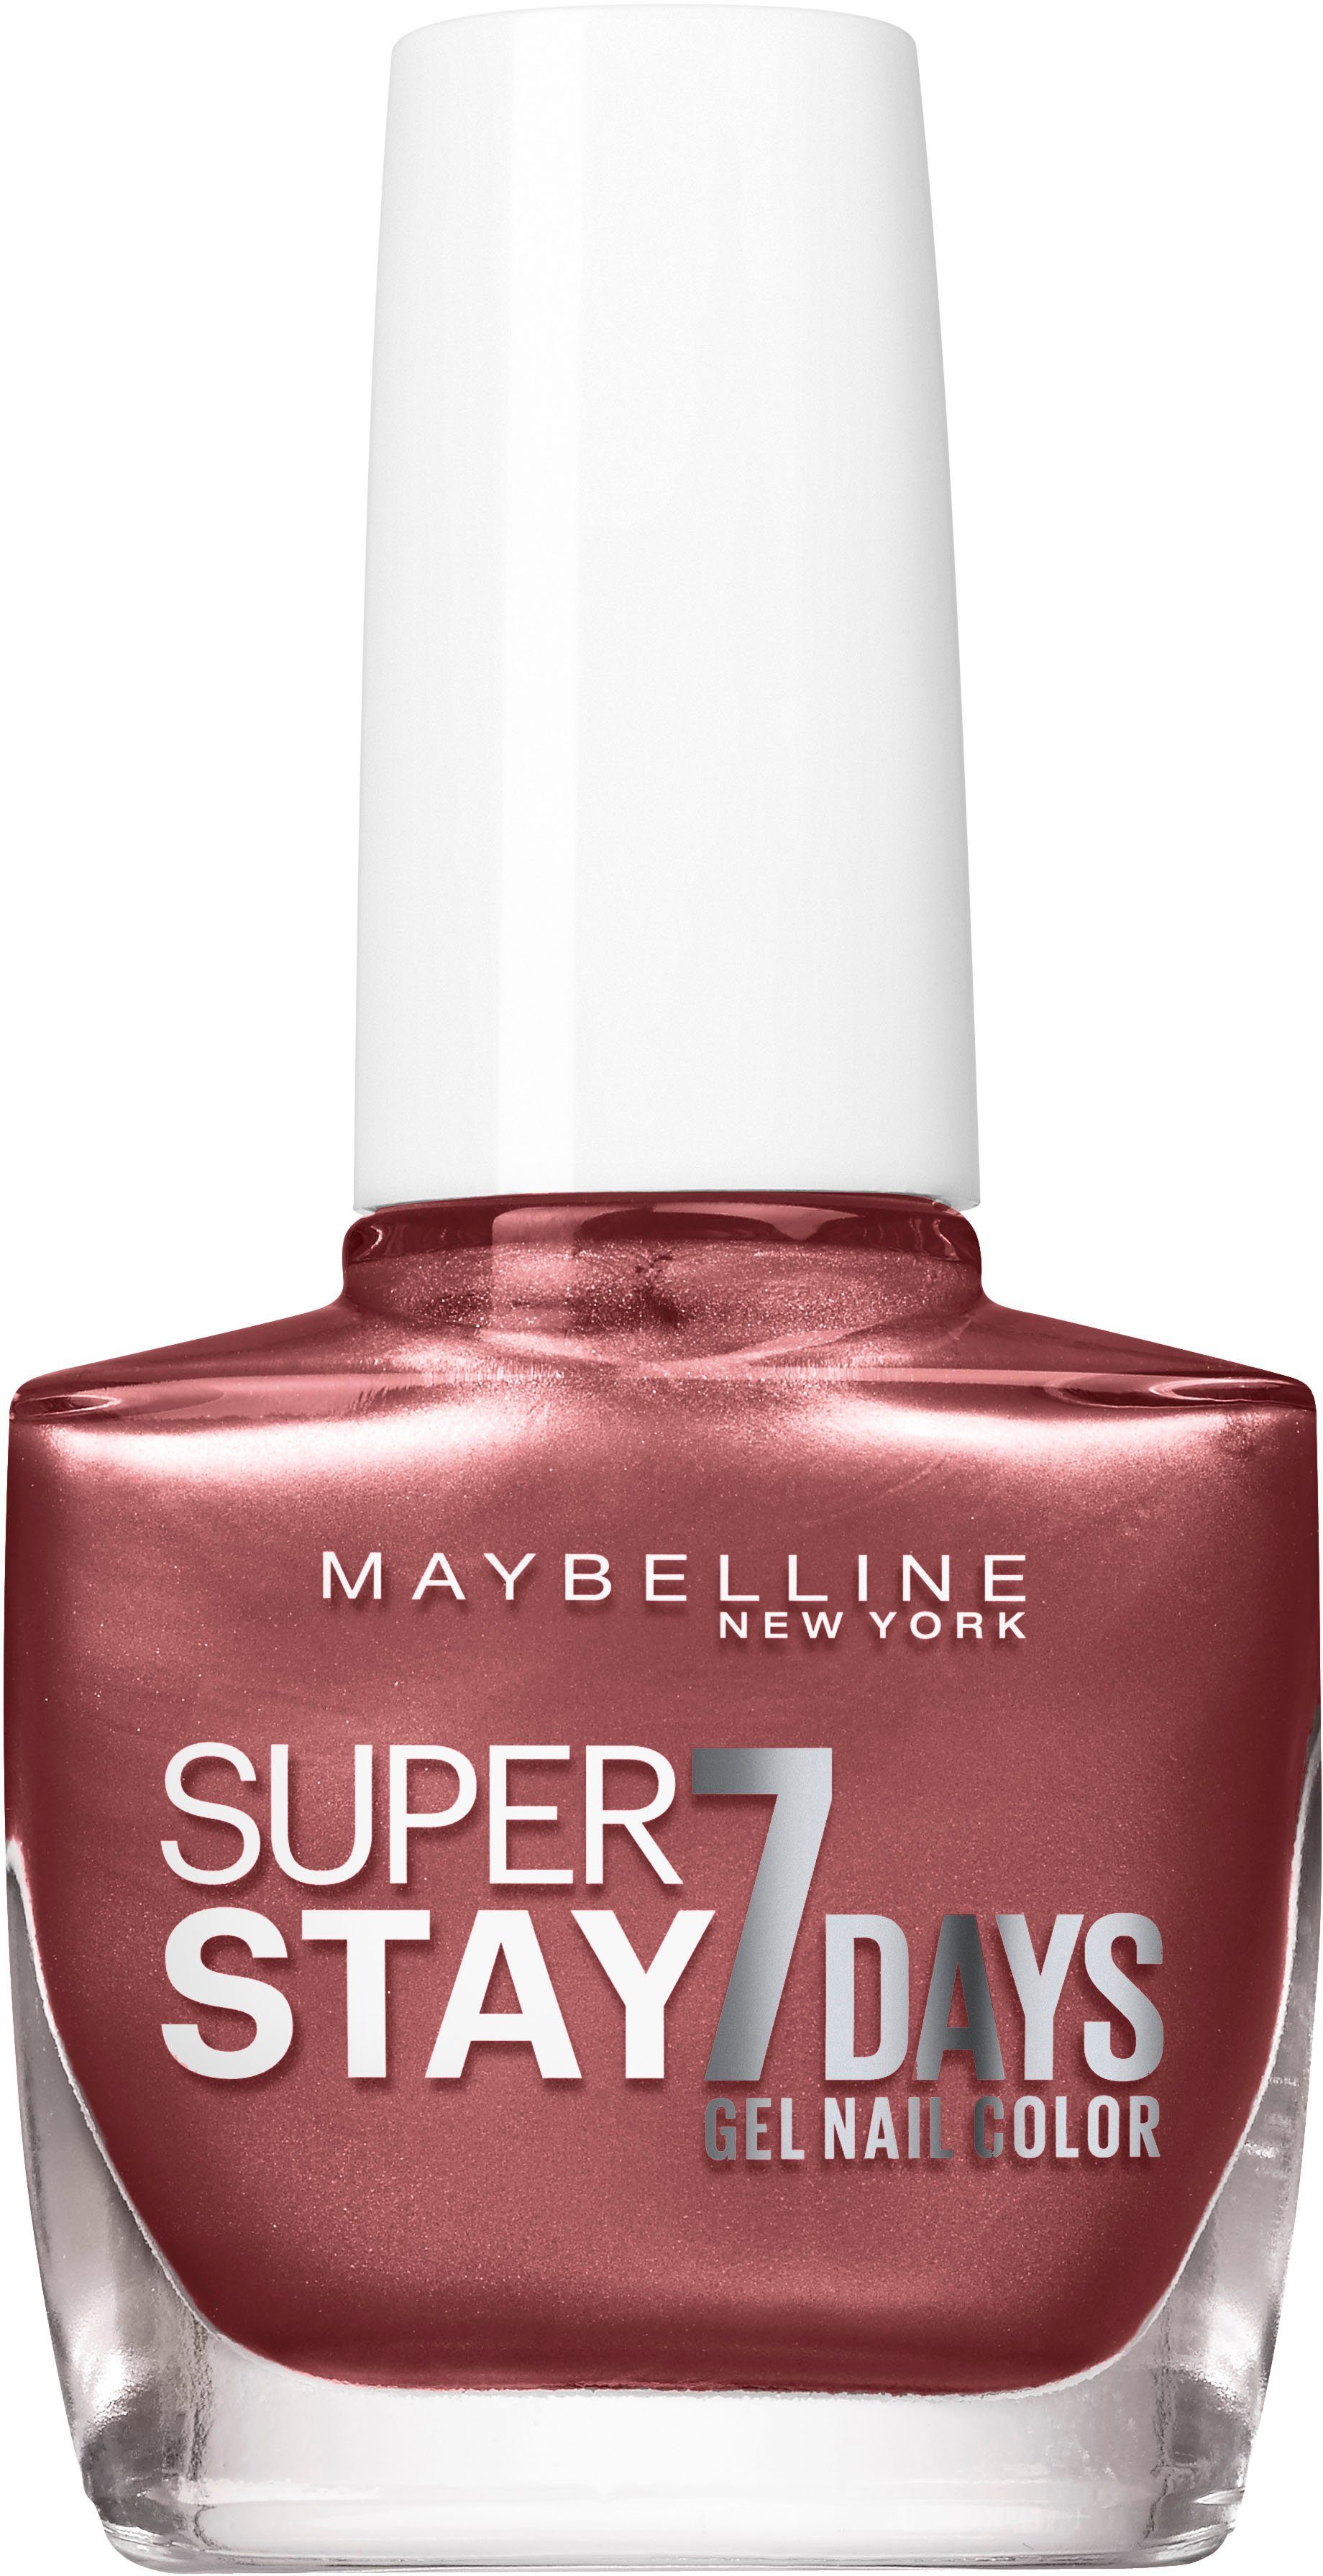 MAYBELLINE NEW YORK Nagellack Superstay 7 Days 912 Rooftop Shade